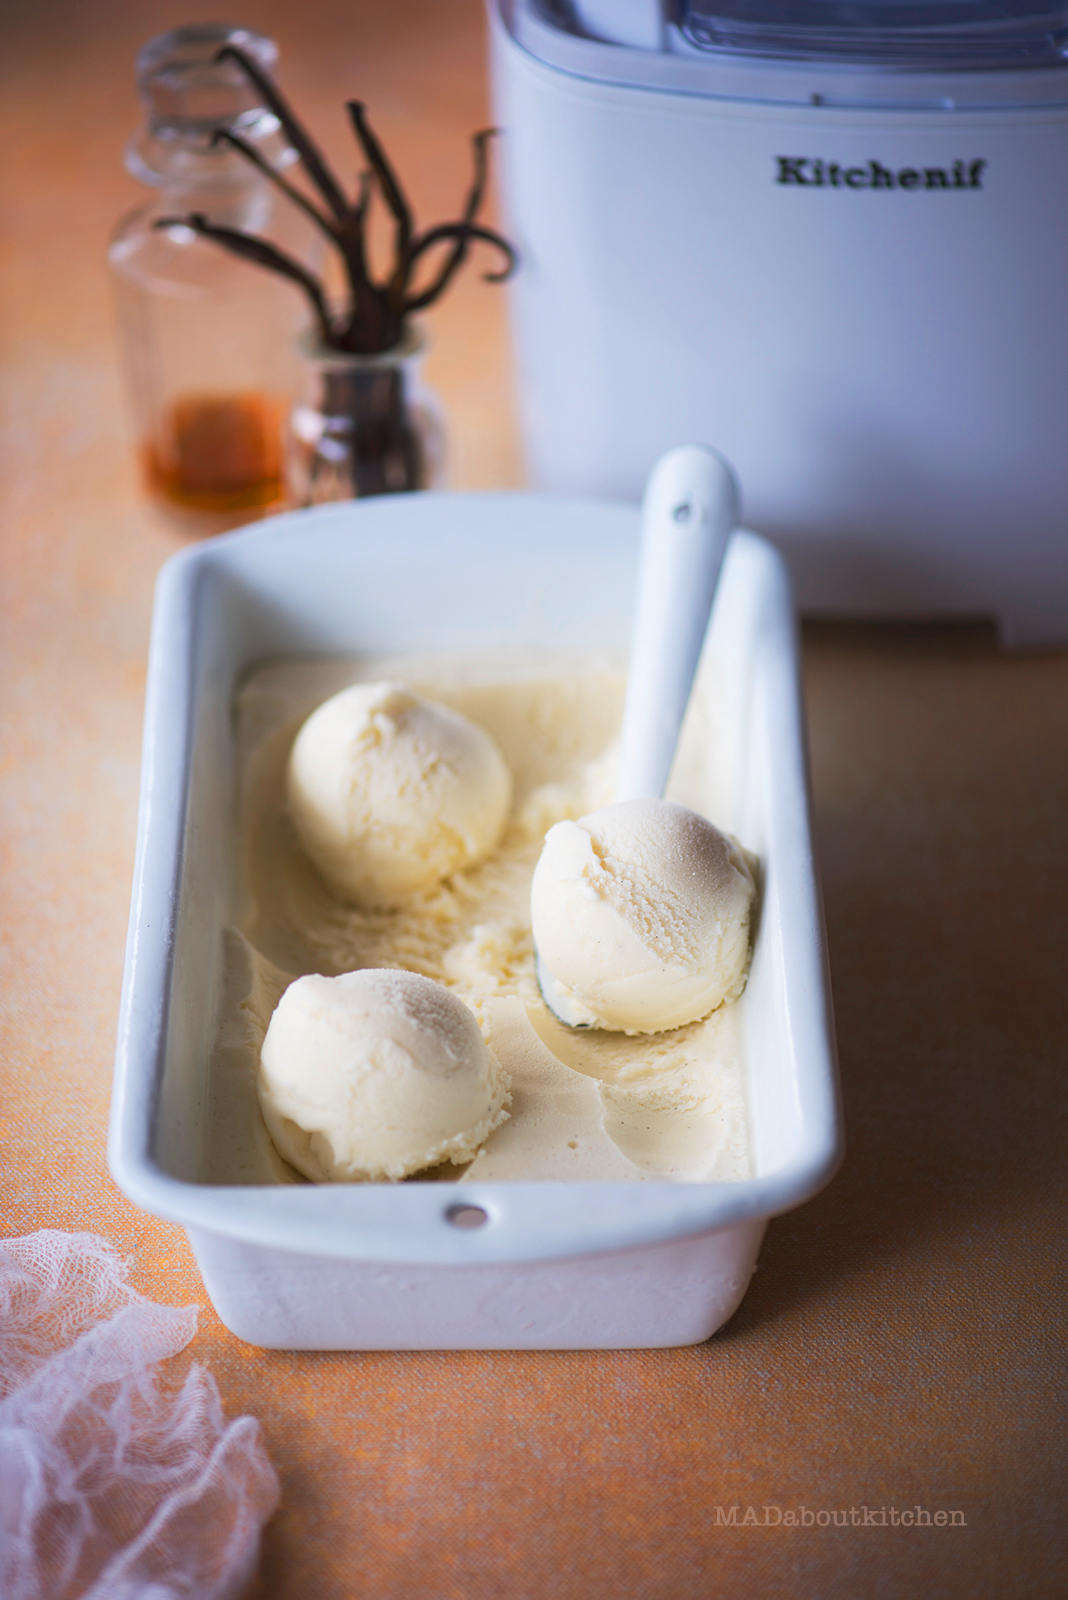 Good, creamy, smooth, soft, homemade Vanilla Ice cream can beat any flavour & if you master the Vanilla ice cream you can experiment with other flavours.